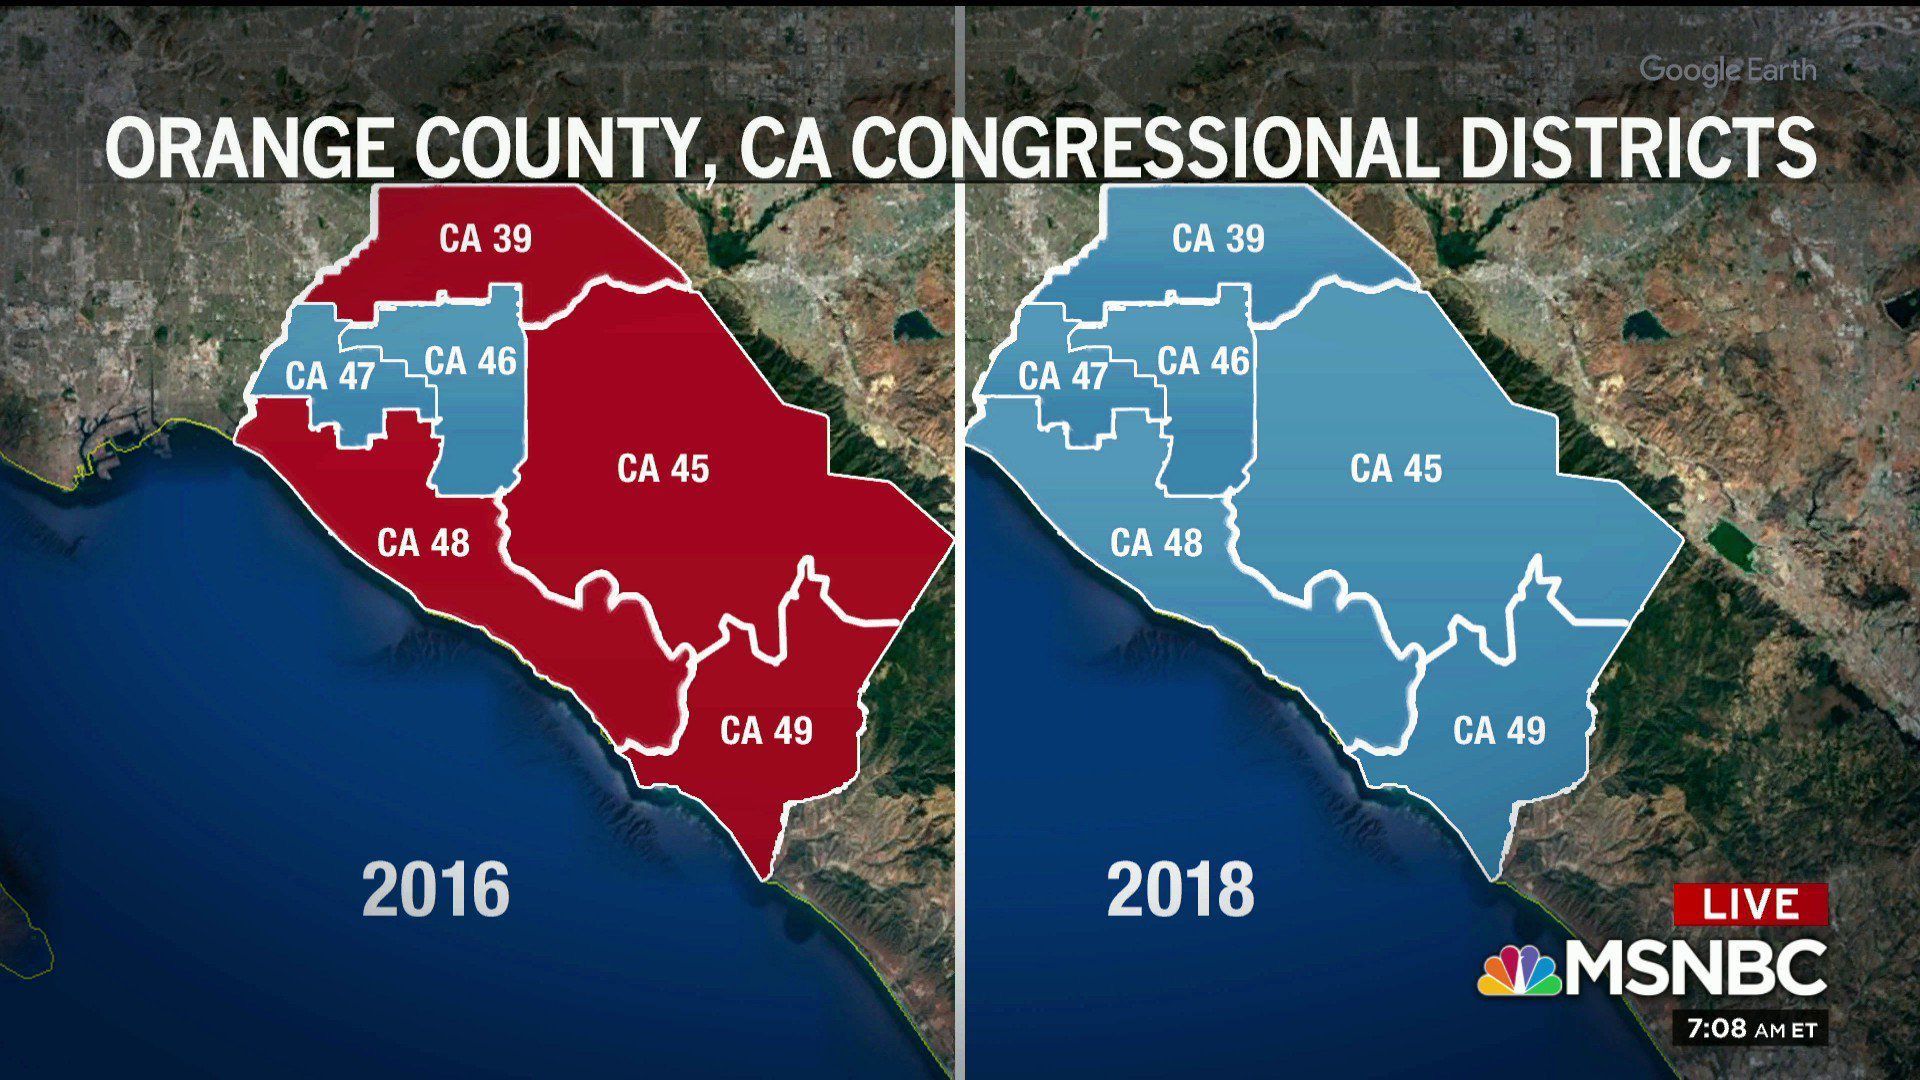 Side-by-side image of Orange County congressional districts